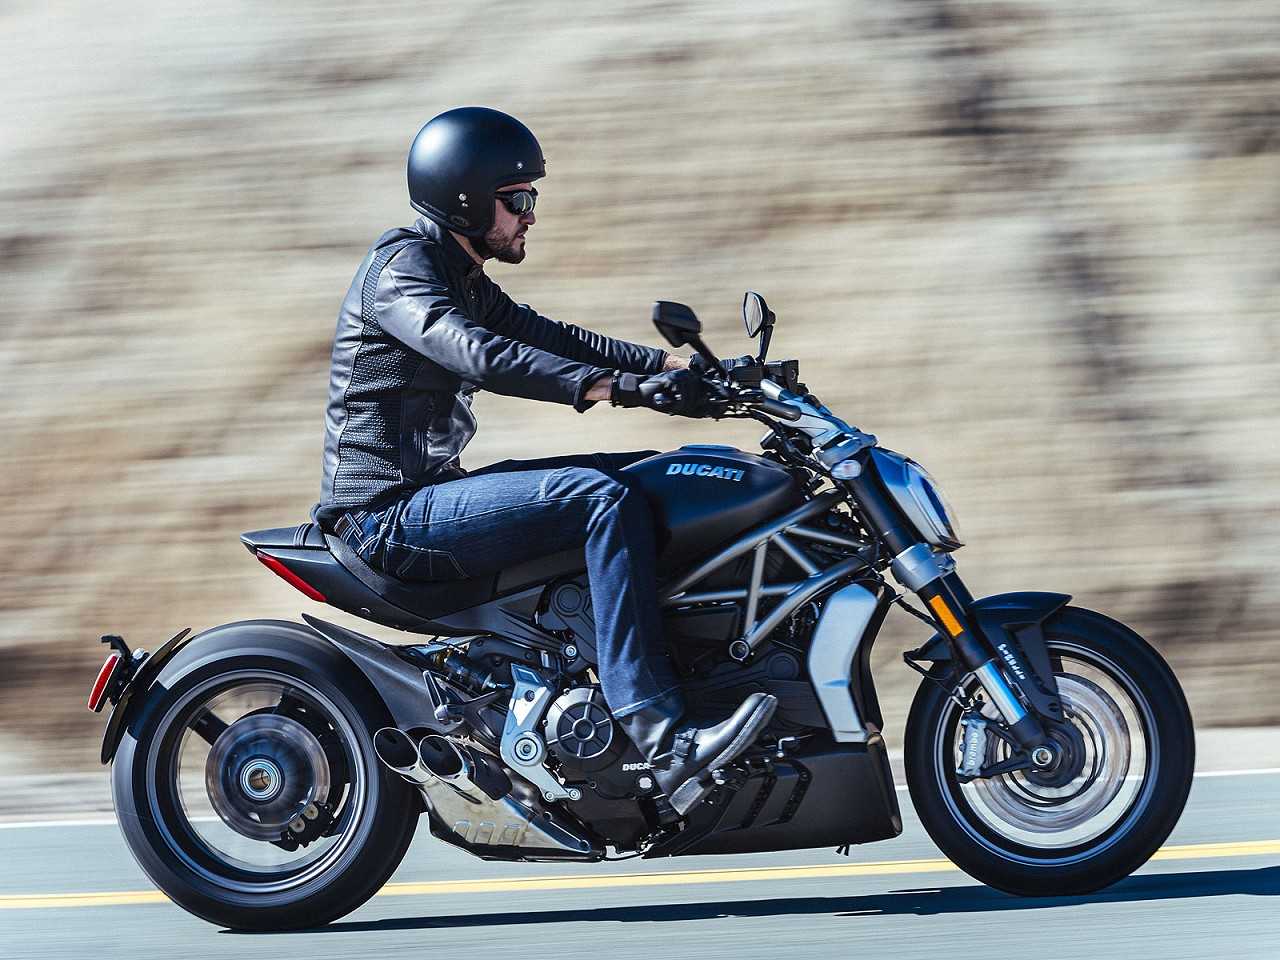 DucatiXDiavel 2016 - lateral